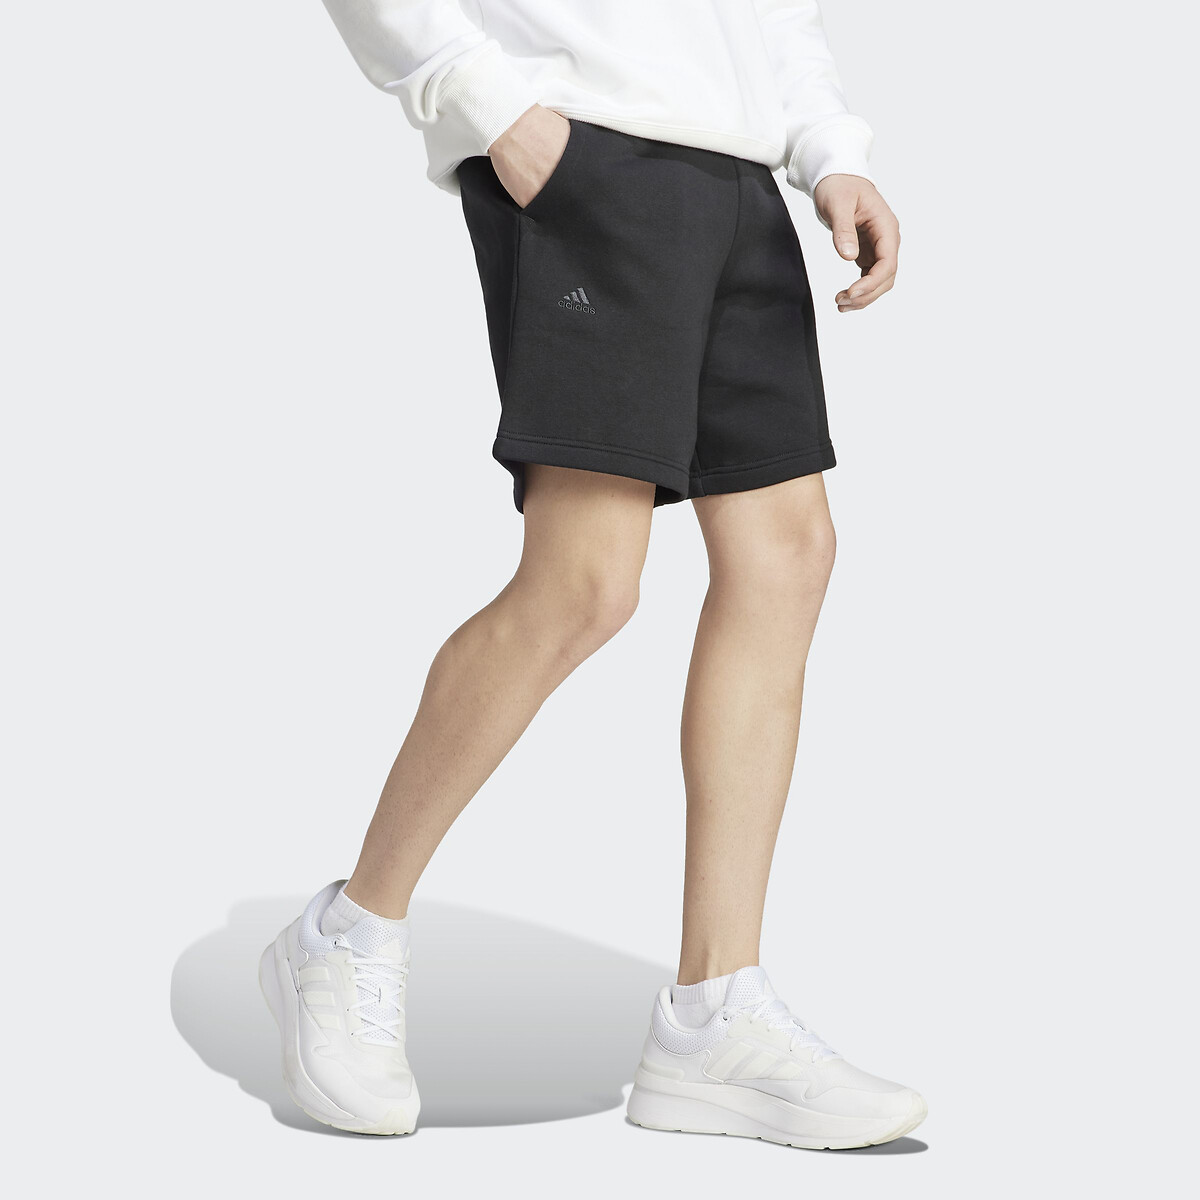 All SZN Fleece Shorts in Cotton Mix